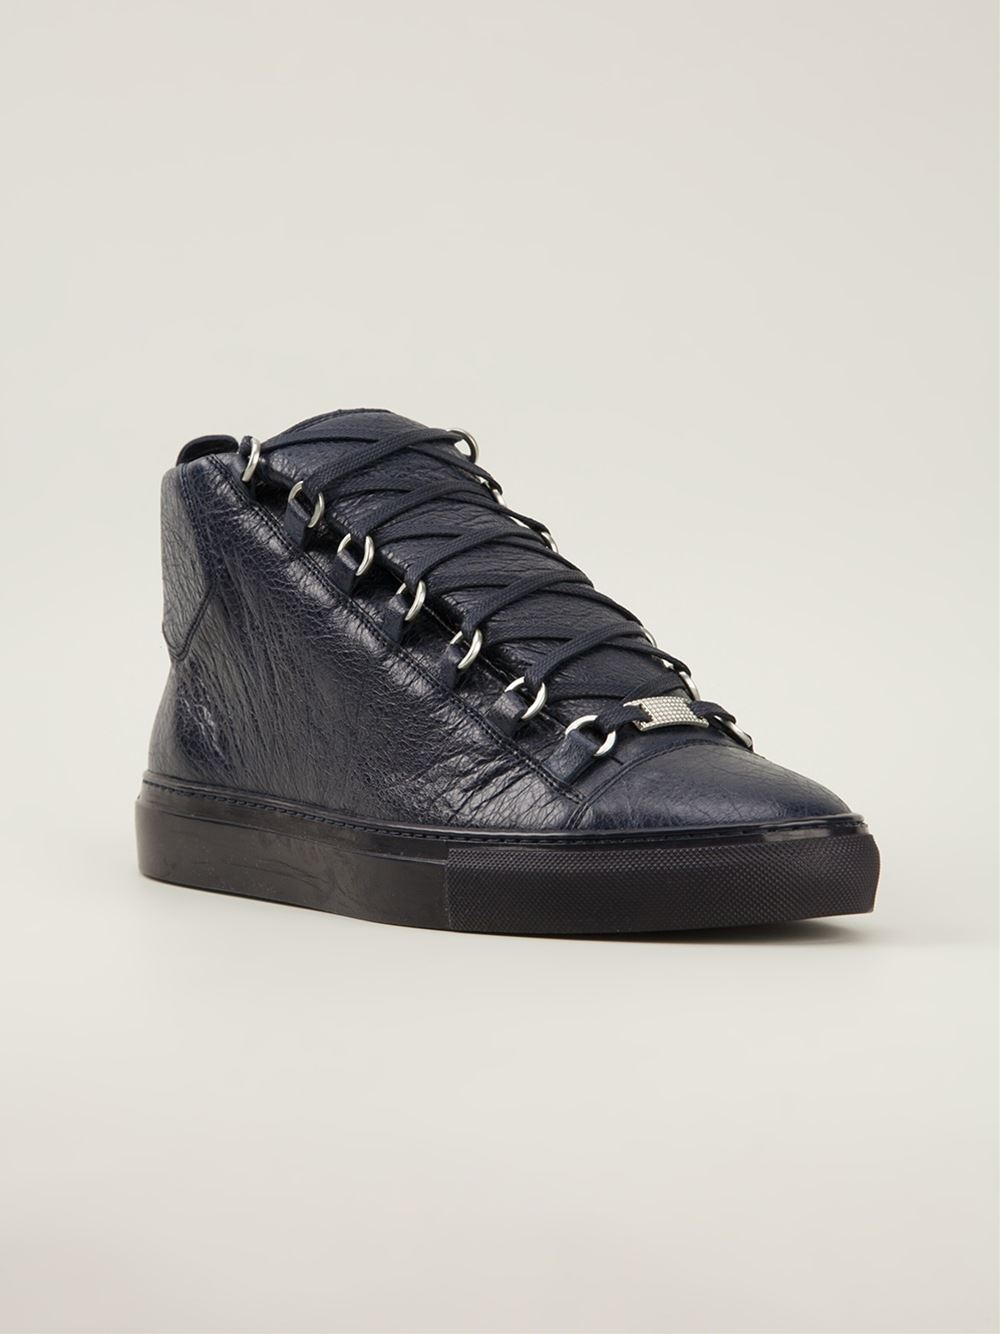 Lyst - Balenciaga Arena Sneakers in Blue for Men